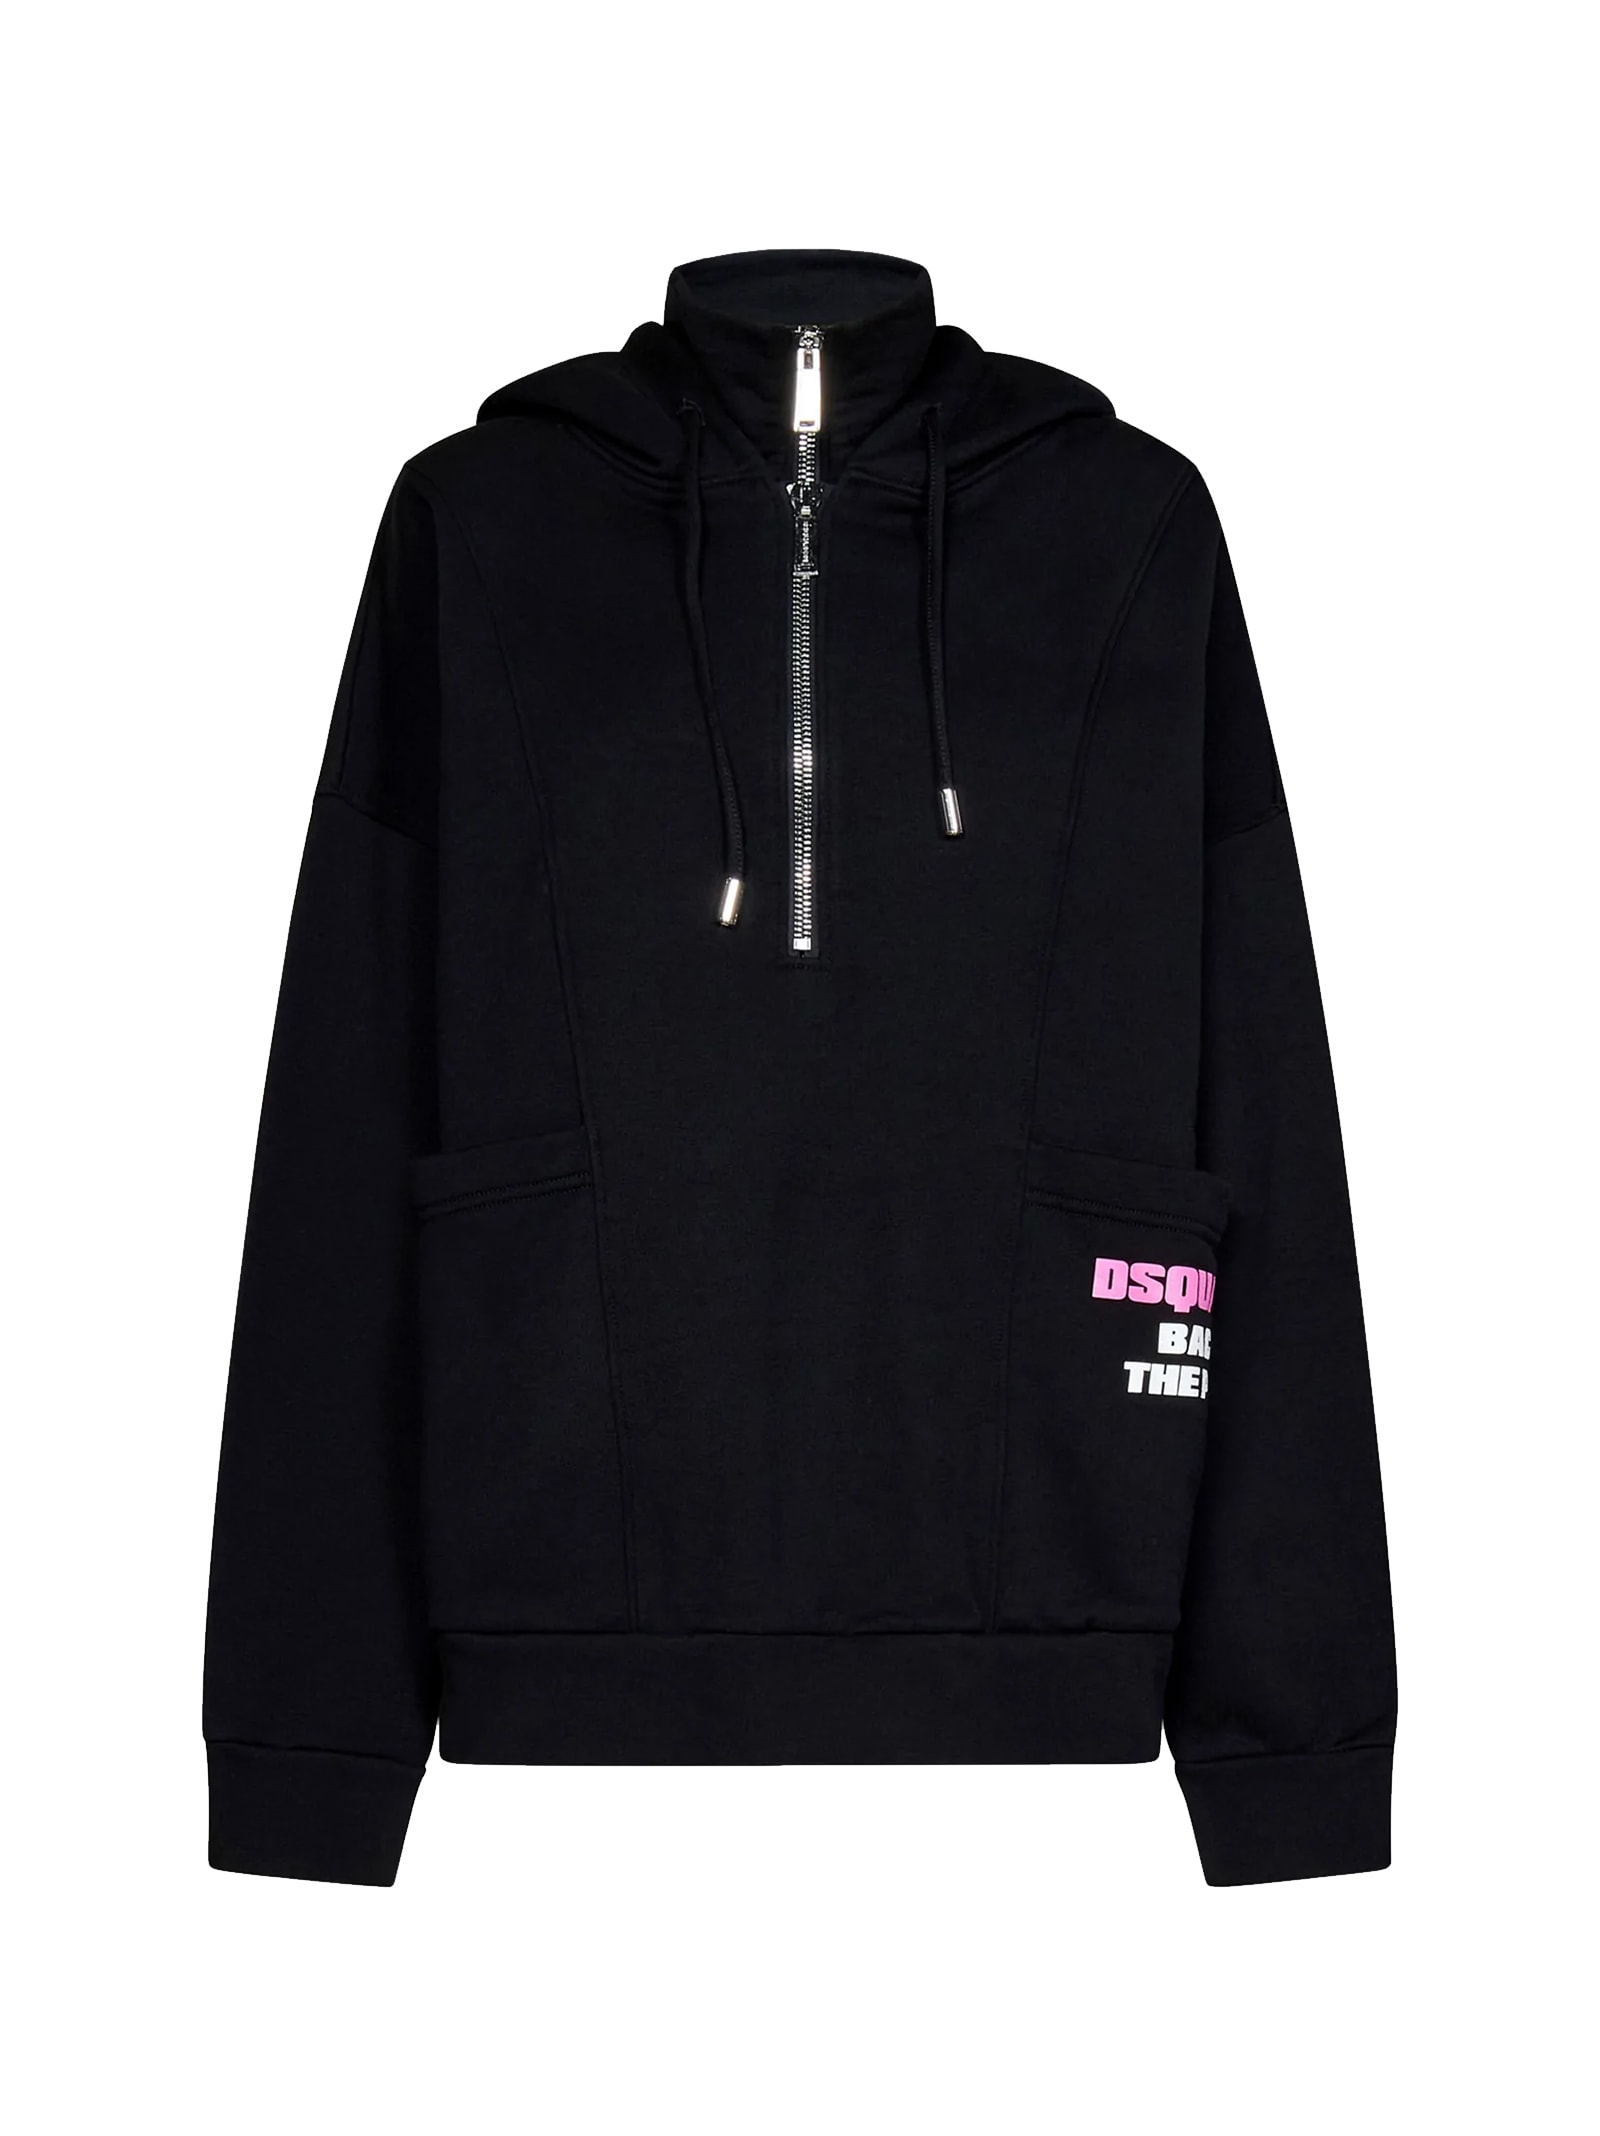 Dsquared2 Hoodie Sweater